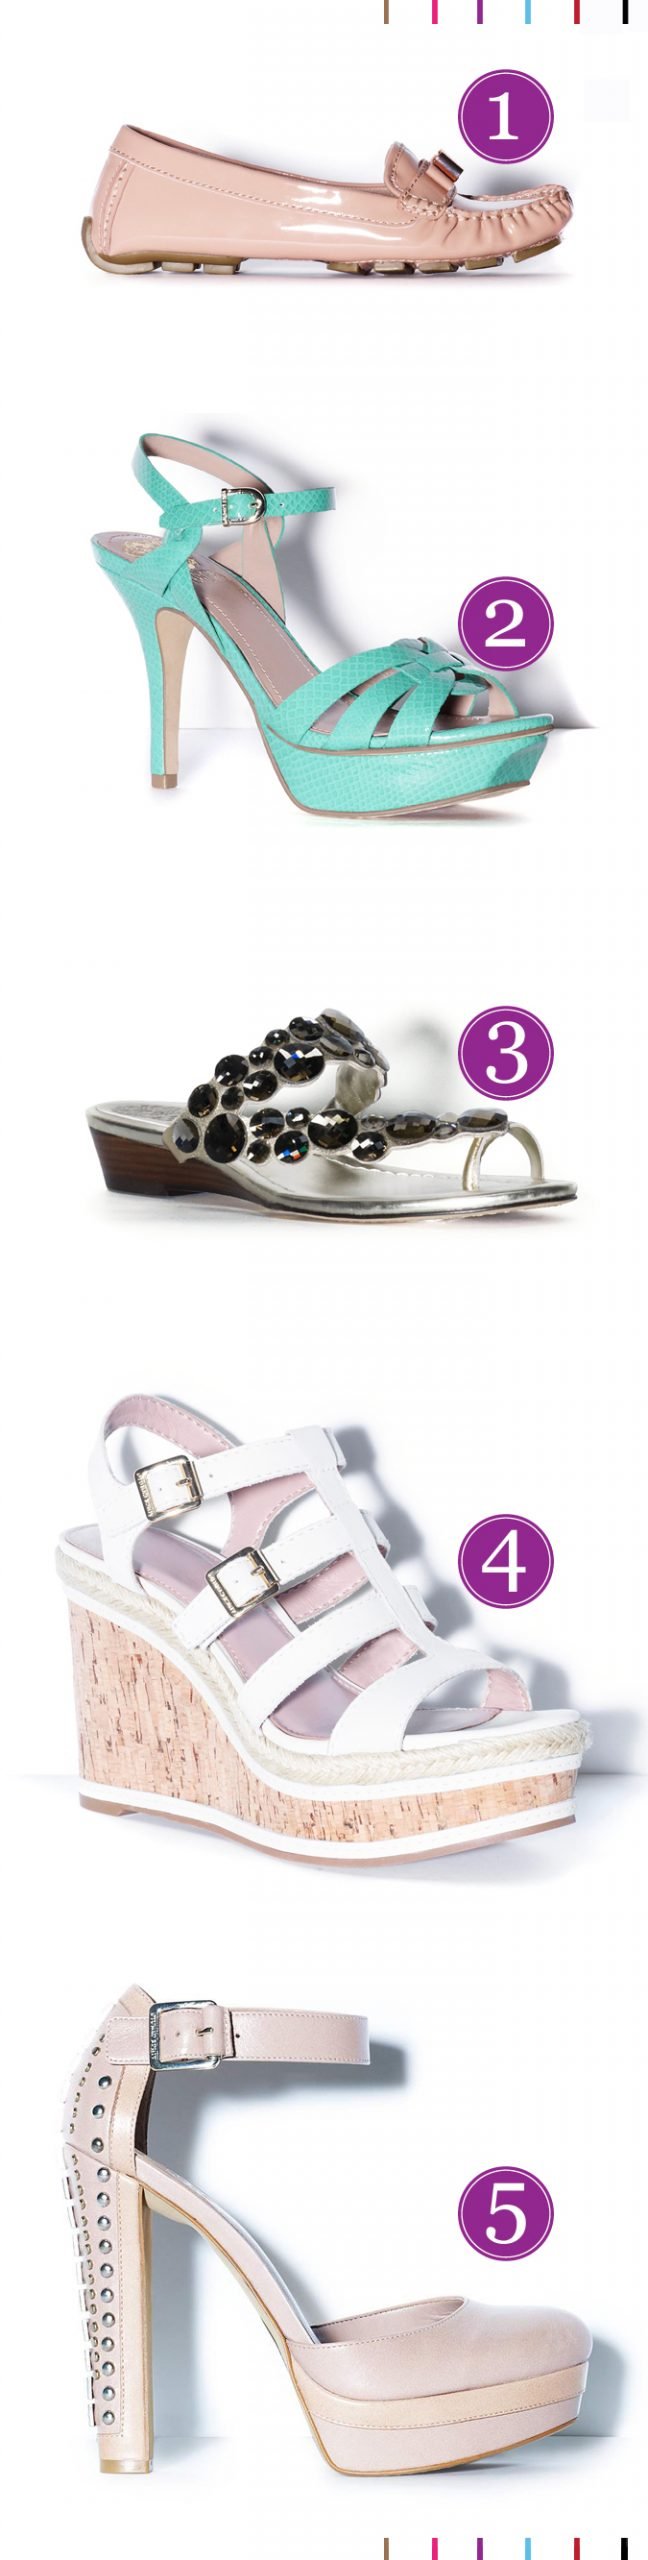 Vince Camuto Shoes Spring 2012 - Serial Indulgence Canada Fashion Blog